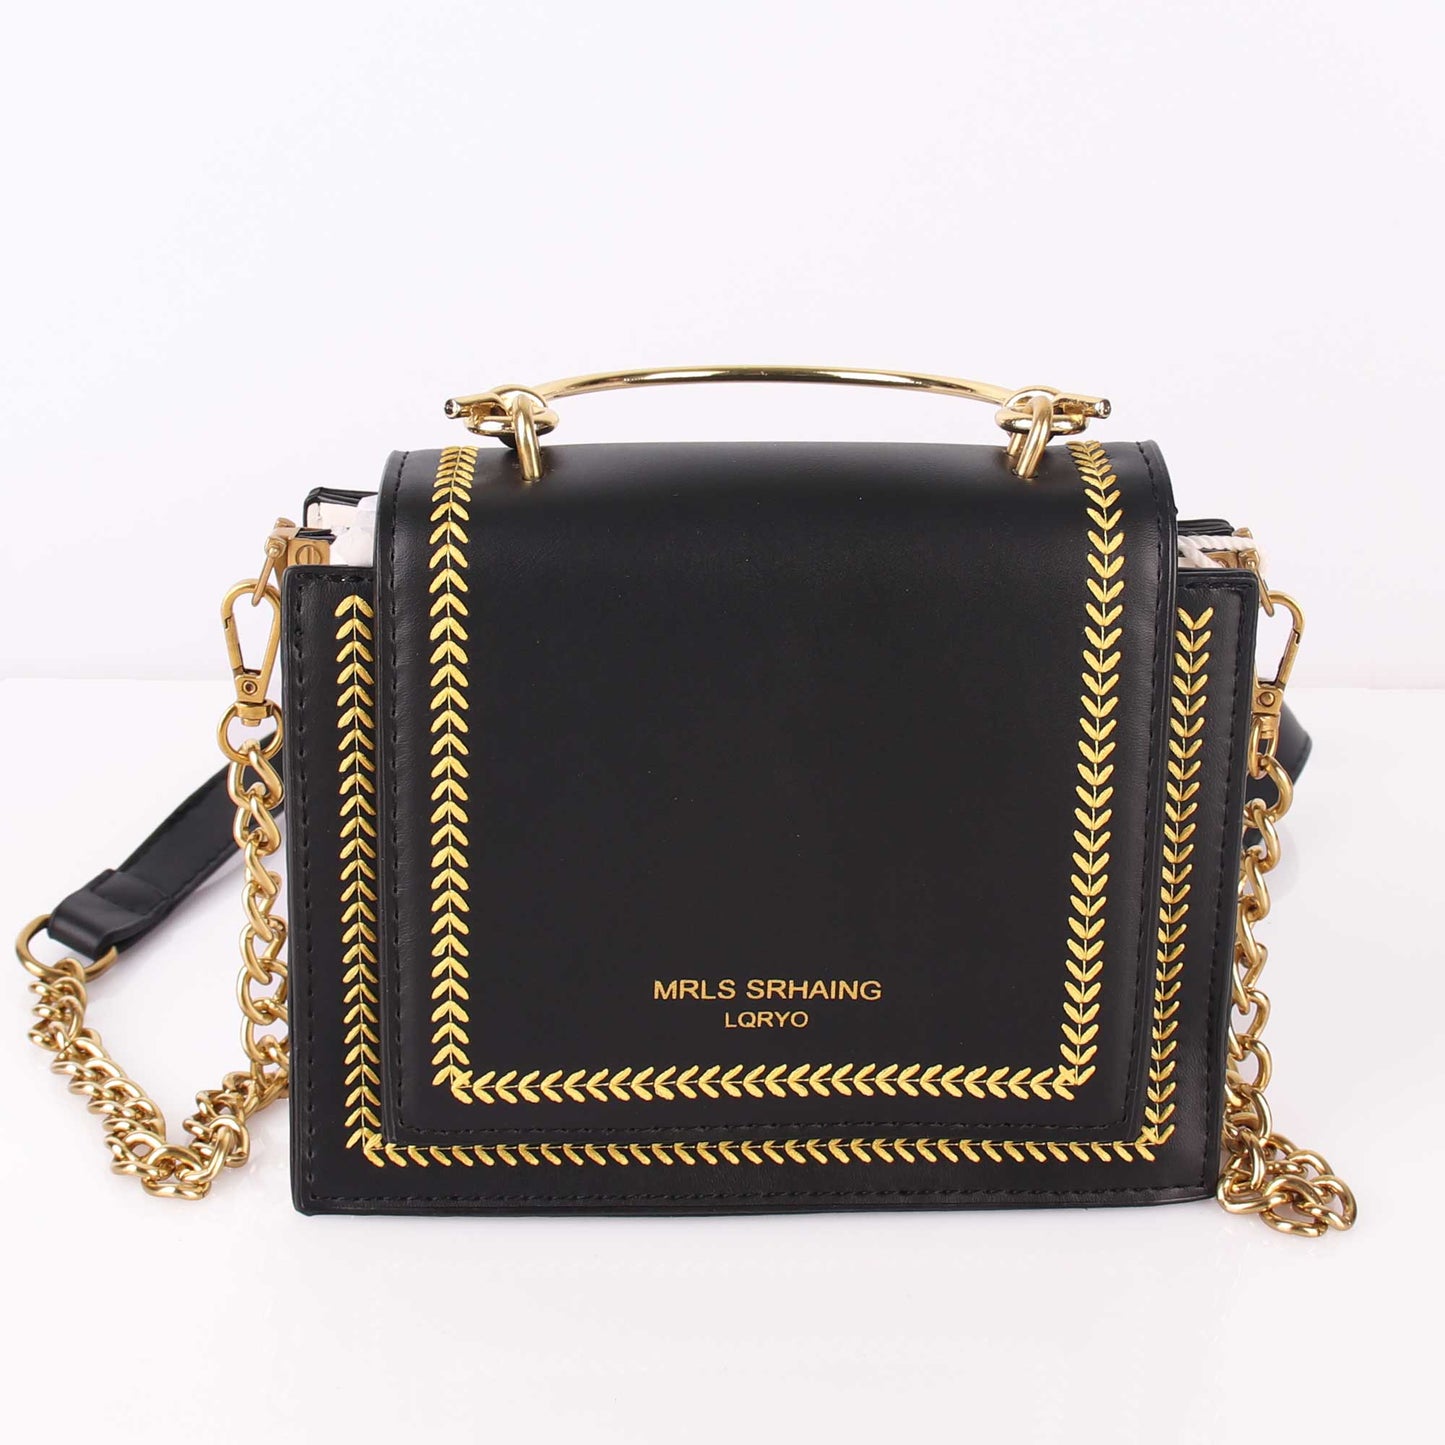 The Graceful Stitched Embroidery Sling Bag in Black